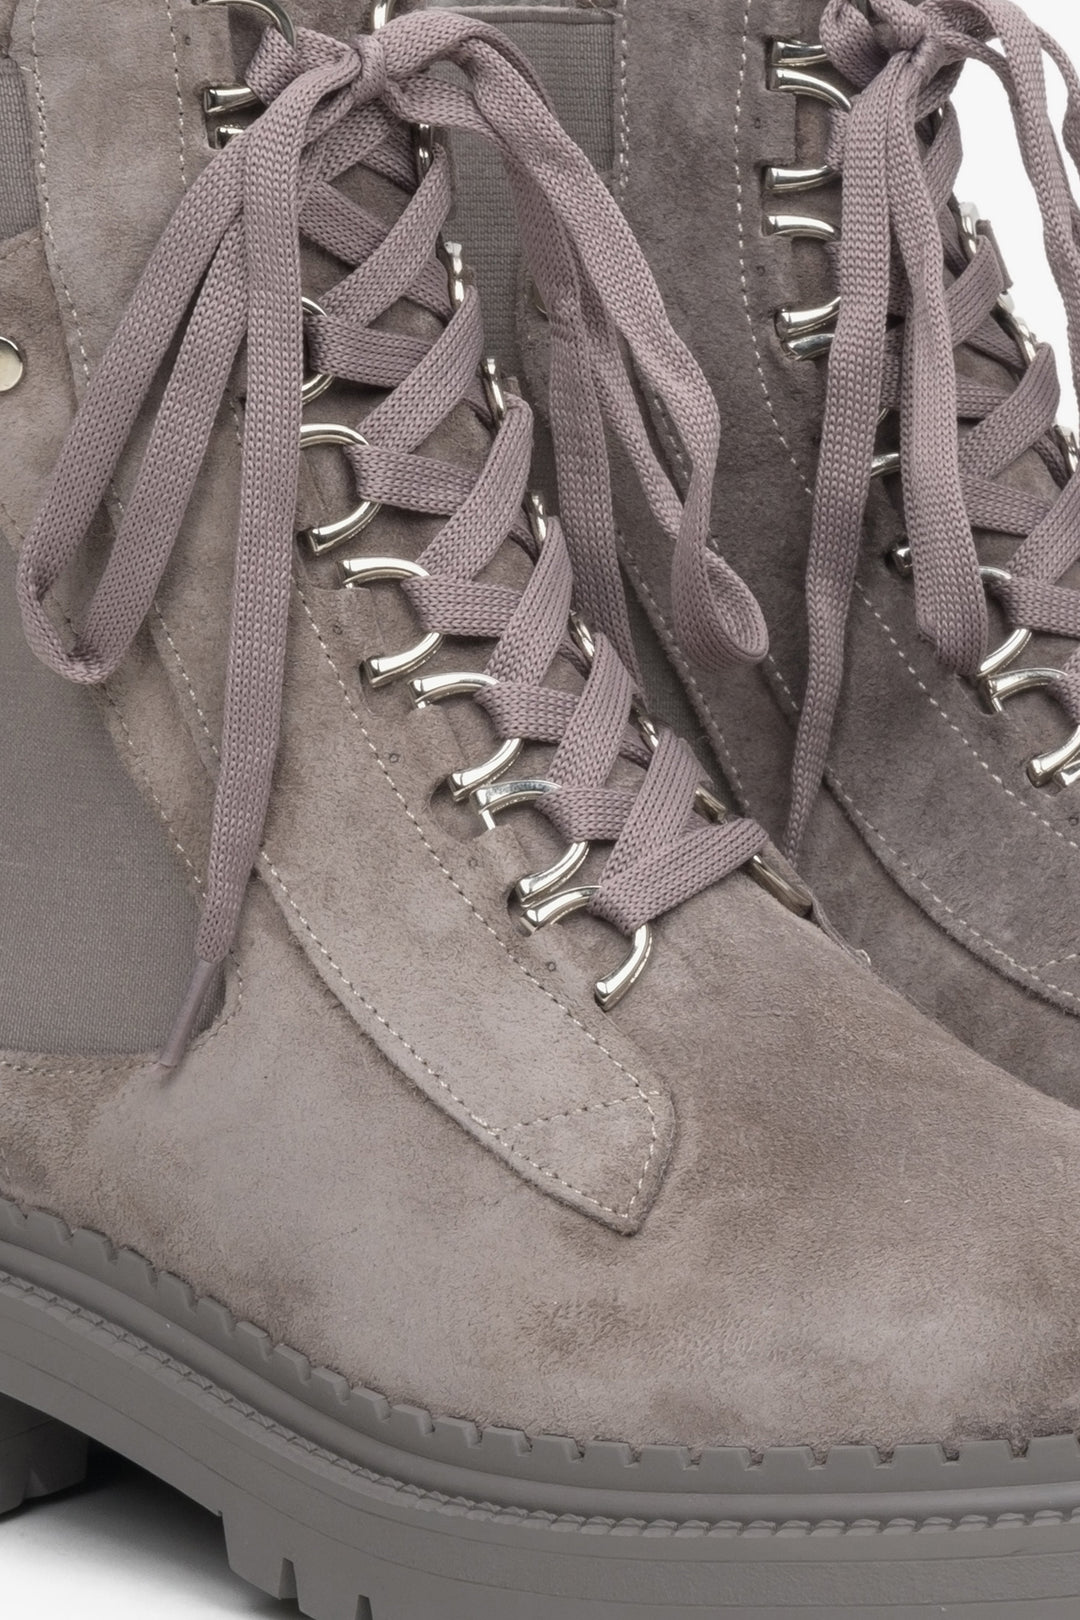 Women's grey lace-up ankle boots - a close-up on details.